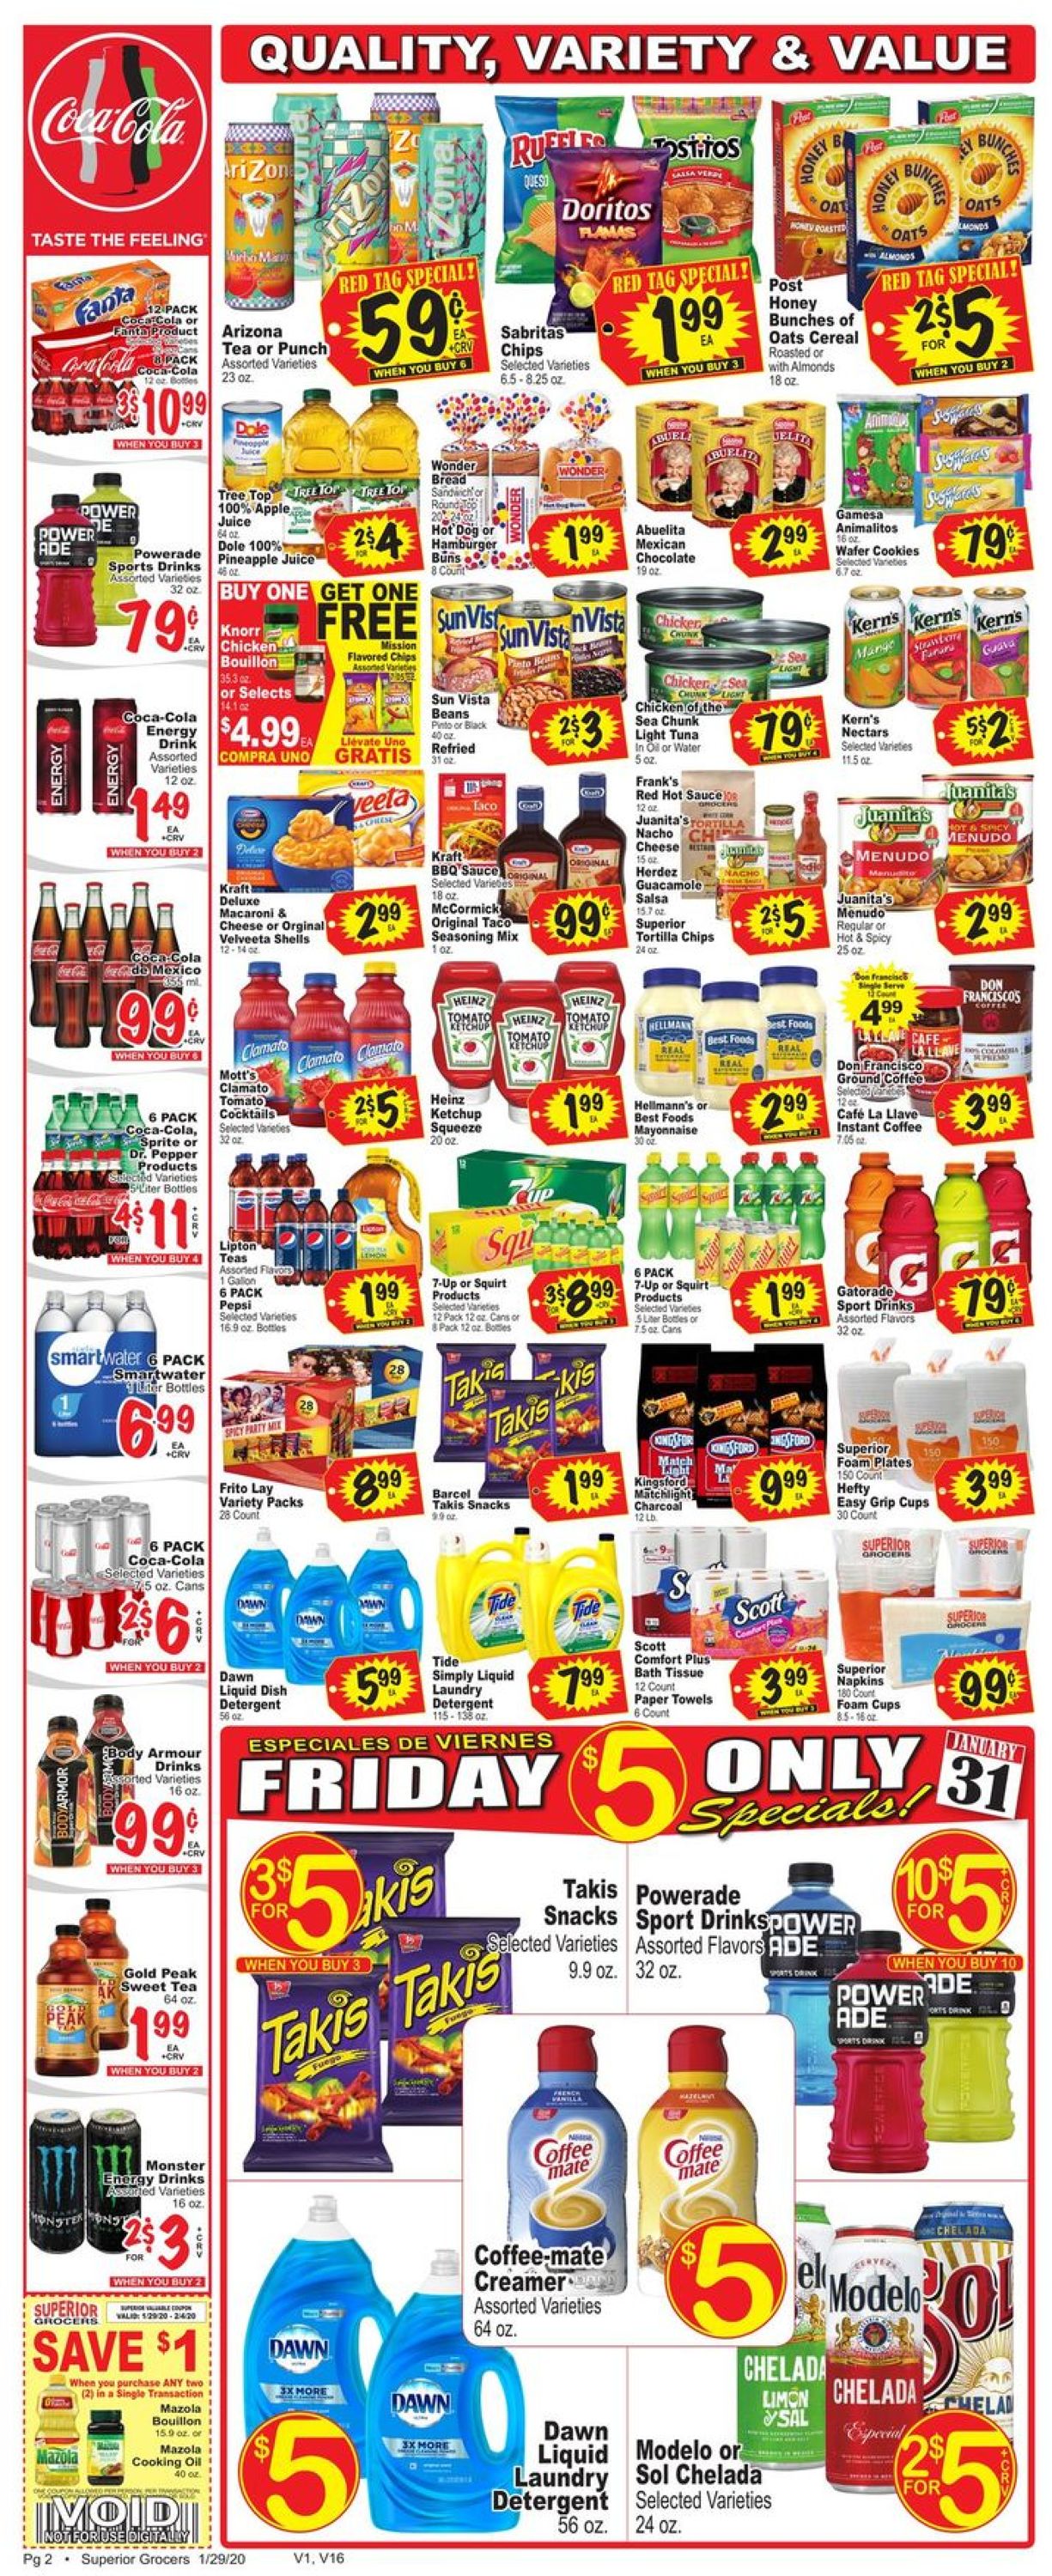 Catalogue Superior Grocers from 01/29/2020